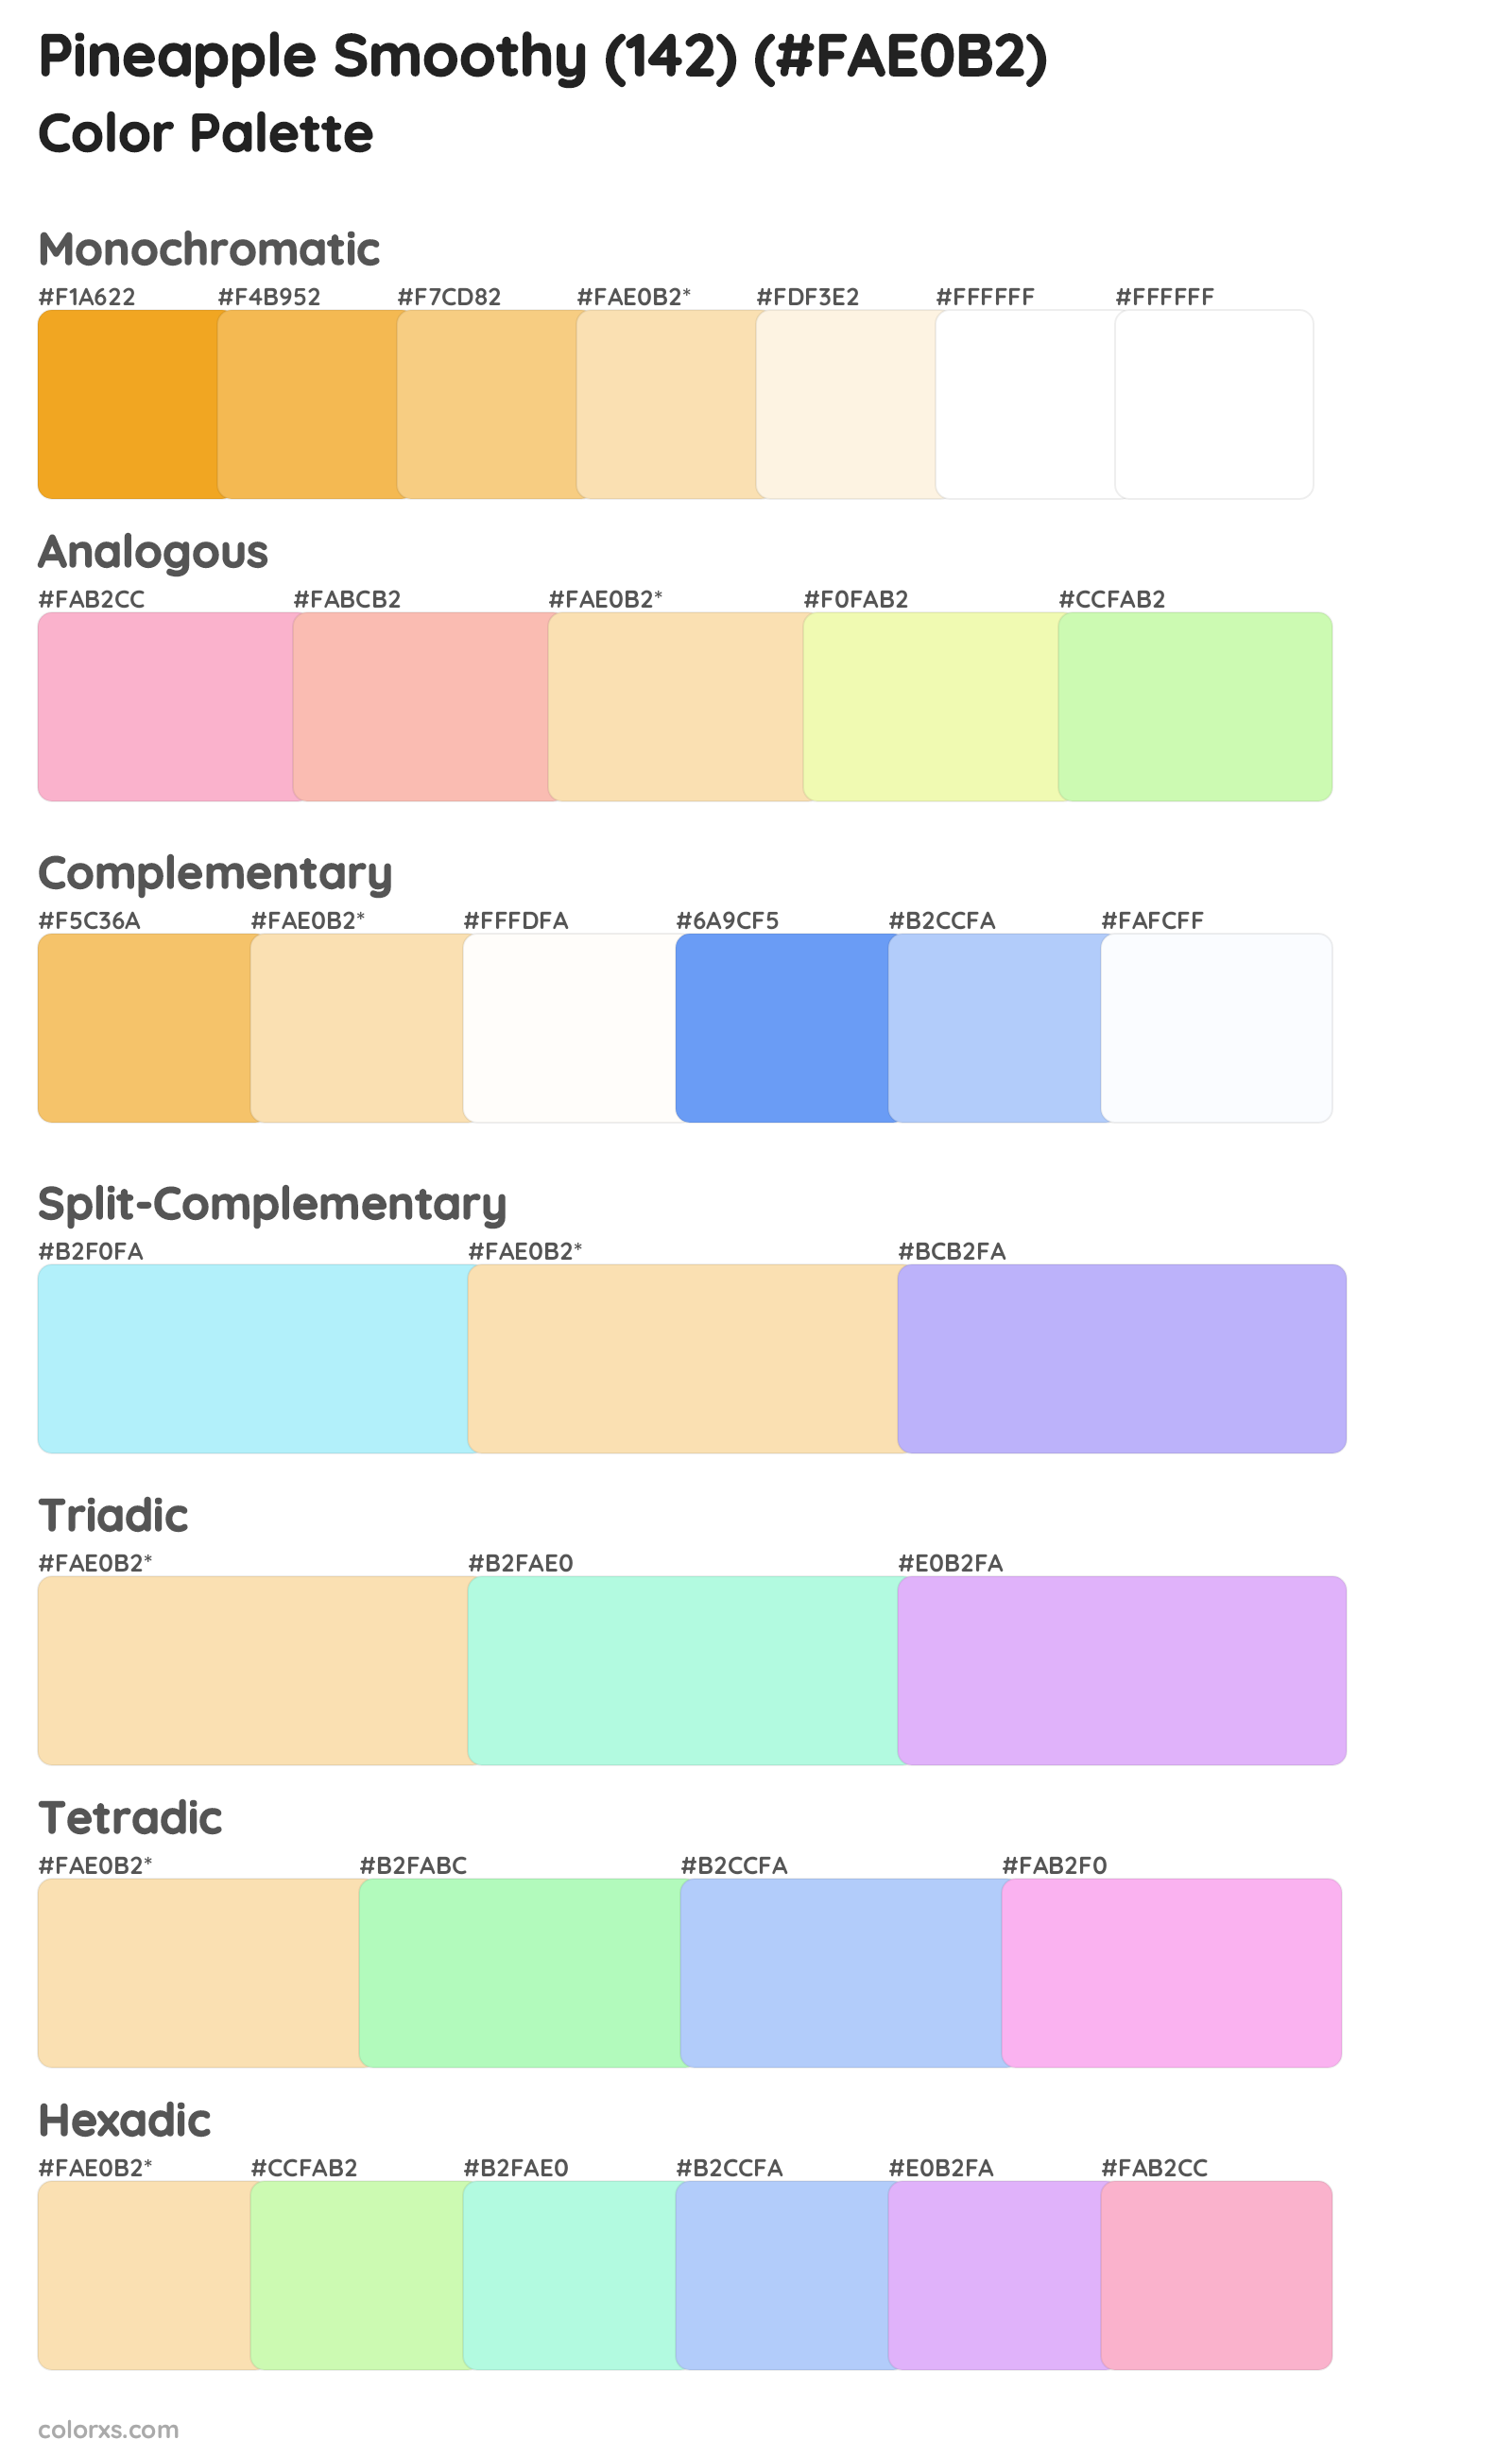 Pineapple Smoothy (142) Color Scheme Palettes